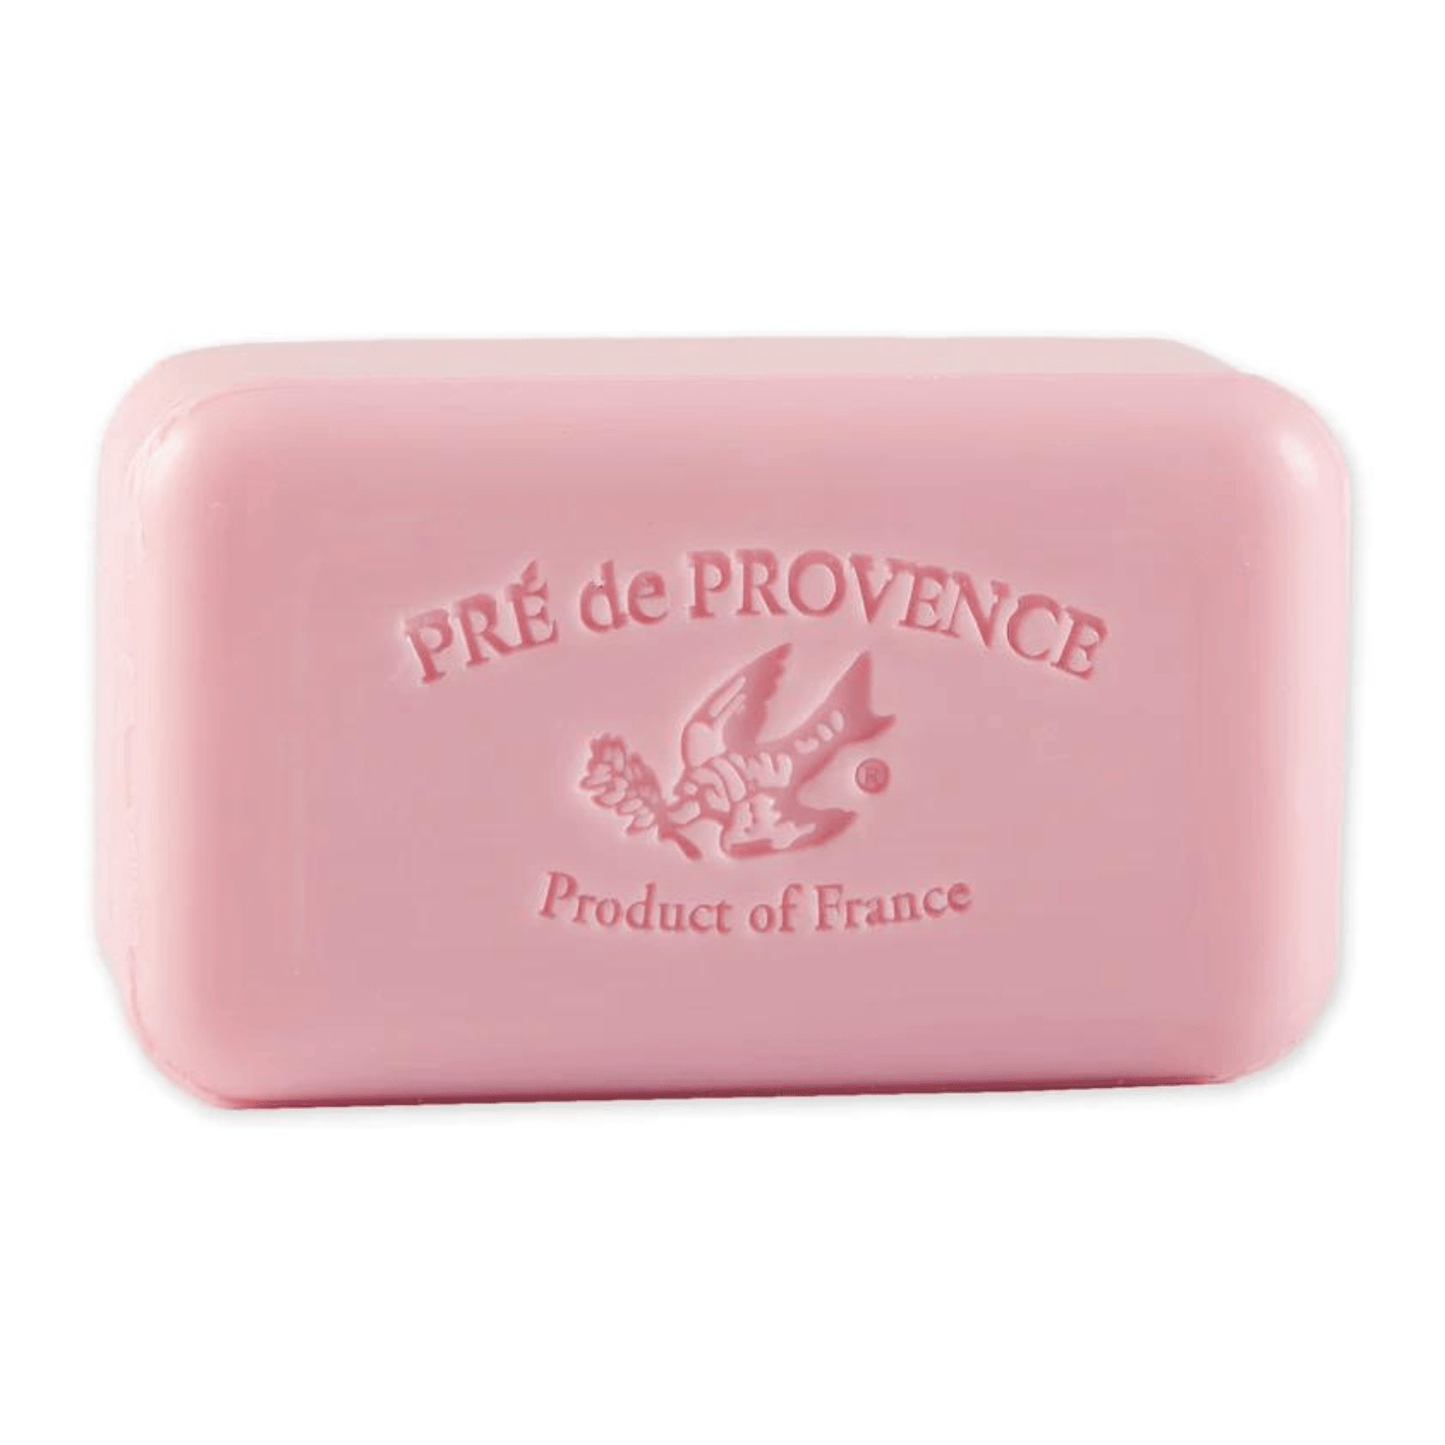 Primary Image of Grapefruit Soap